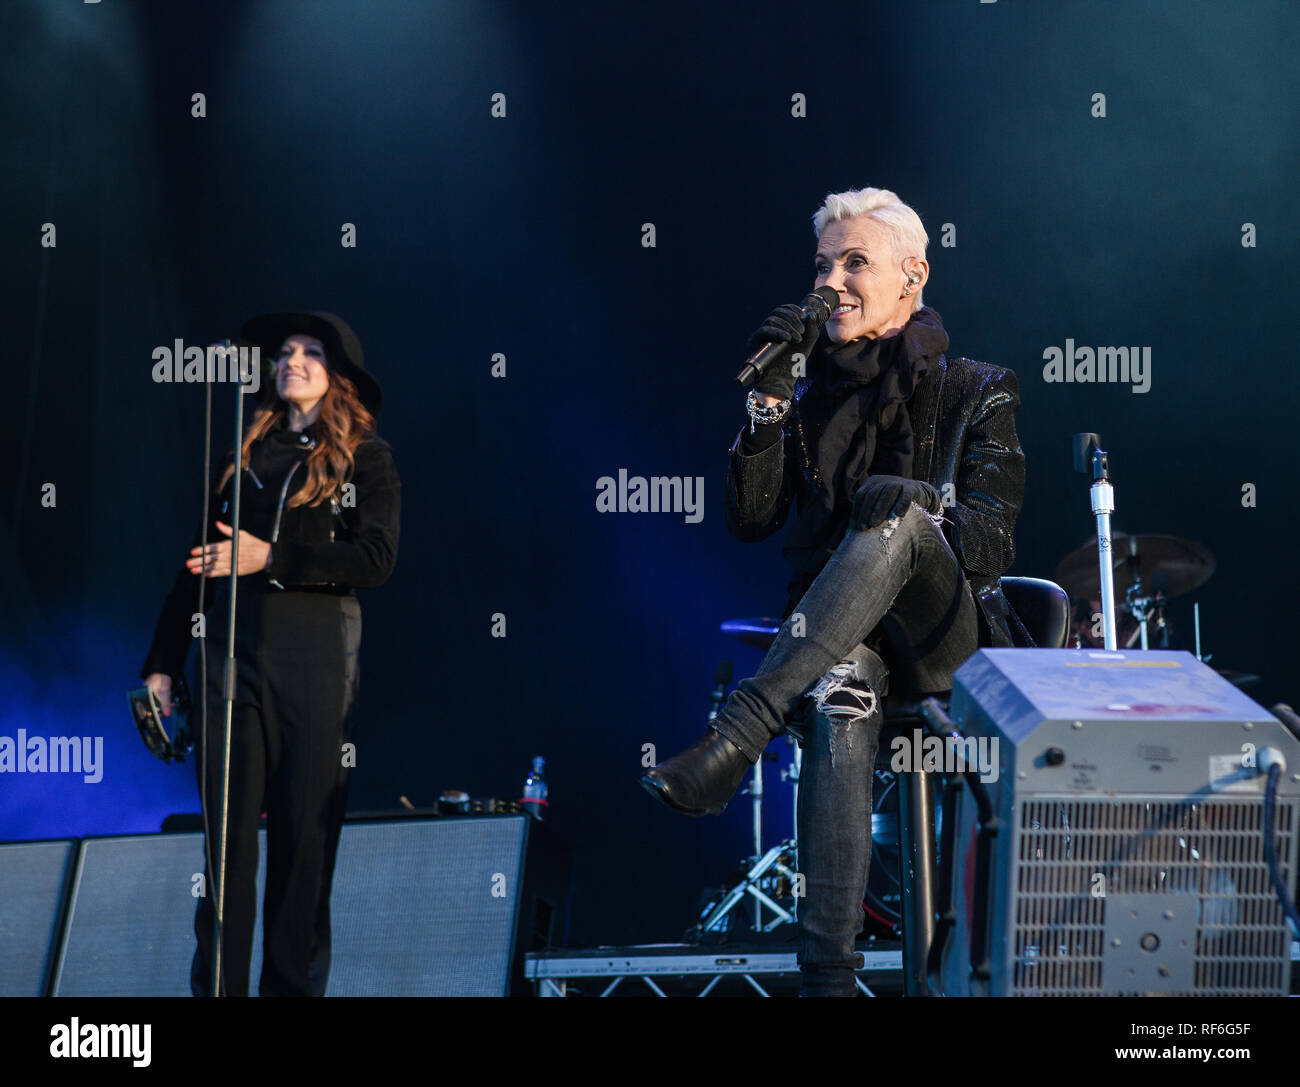 The Swedish pop rock duo Roxette performs a live concert at the Danish music festival Jelling Festival 2015. The duo consists of singer Marie Fredriksson and musician Per Gessle. Denmark, 23/05 2015. EXCLUDING DENMARK. Stock Photo